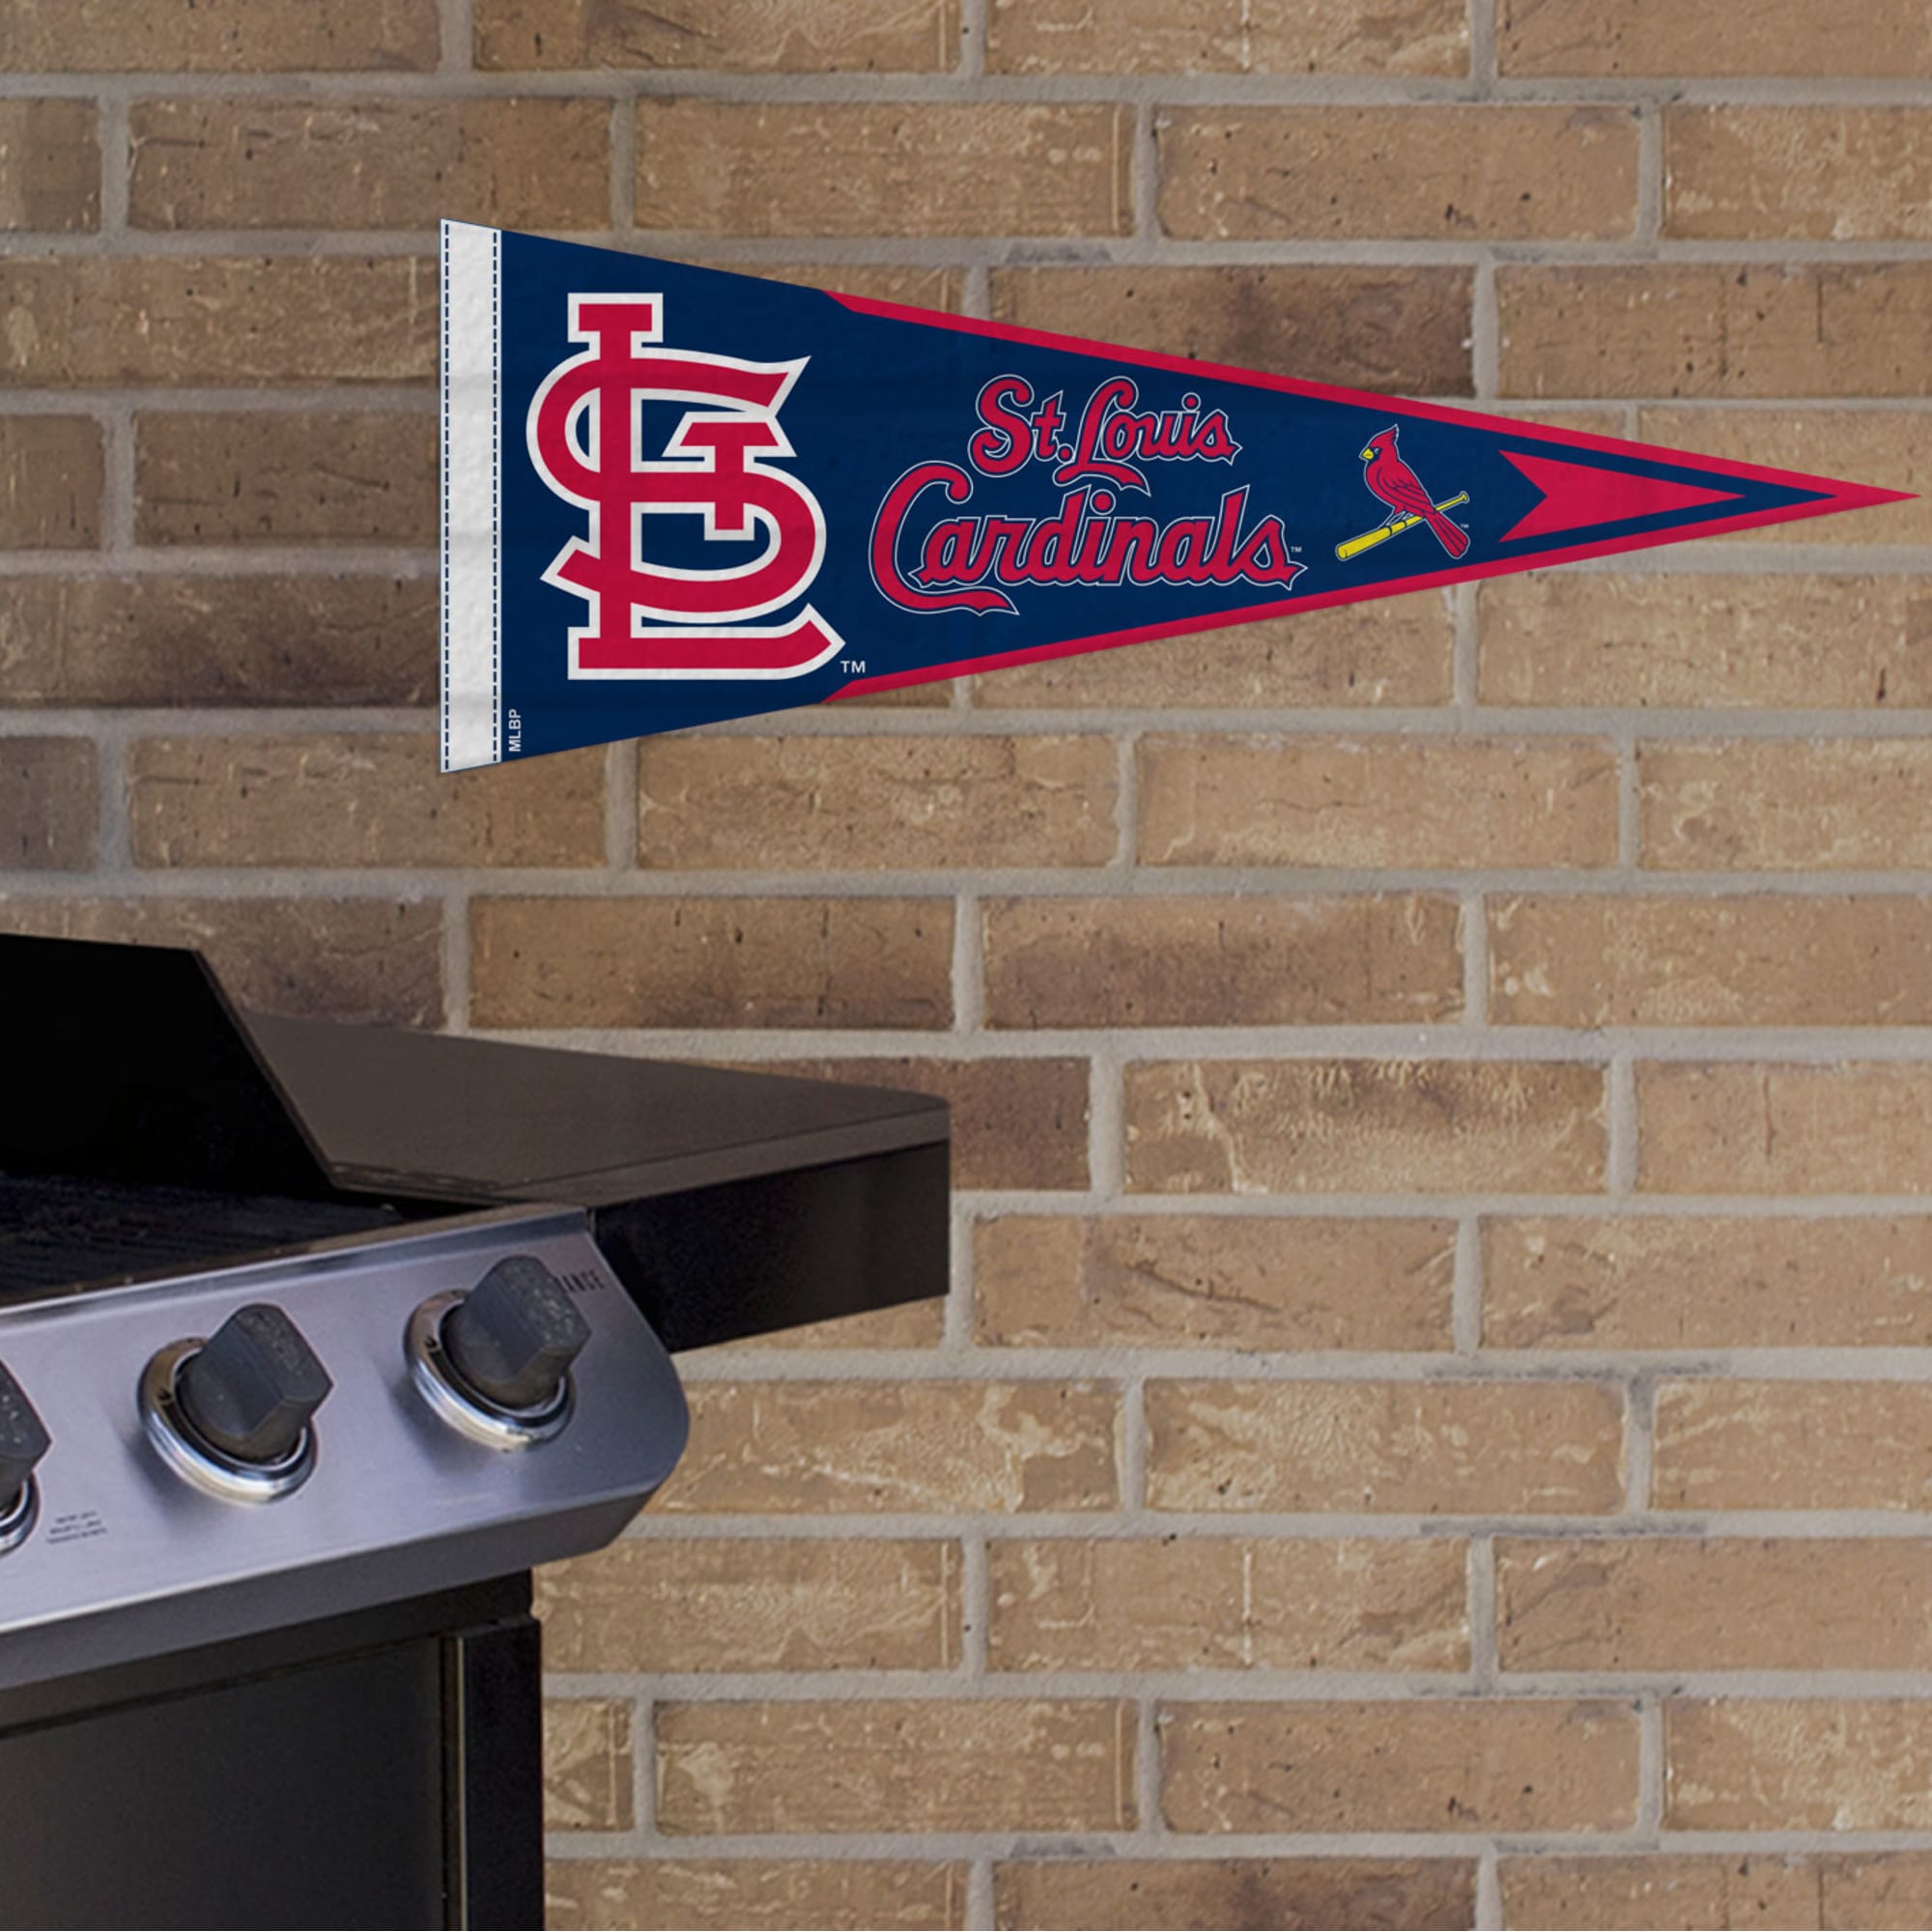 St. Louis Cardinals: Pennant - Officially Licensed MLB Outdoor Graphic 24.0"W x 9.0"H by Fathead | Wood/Aluminum